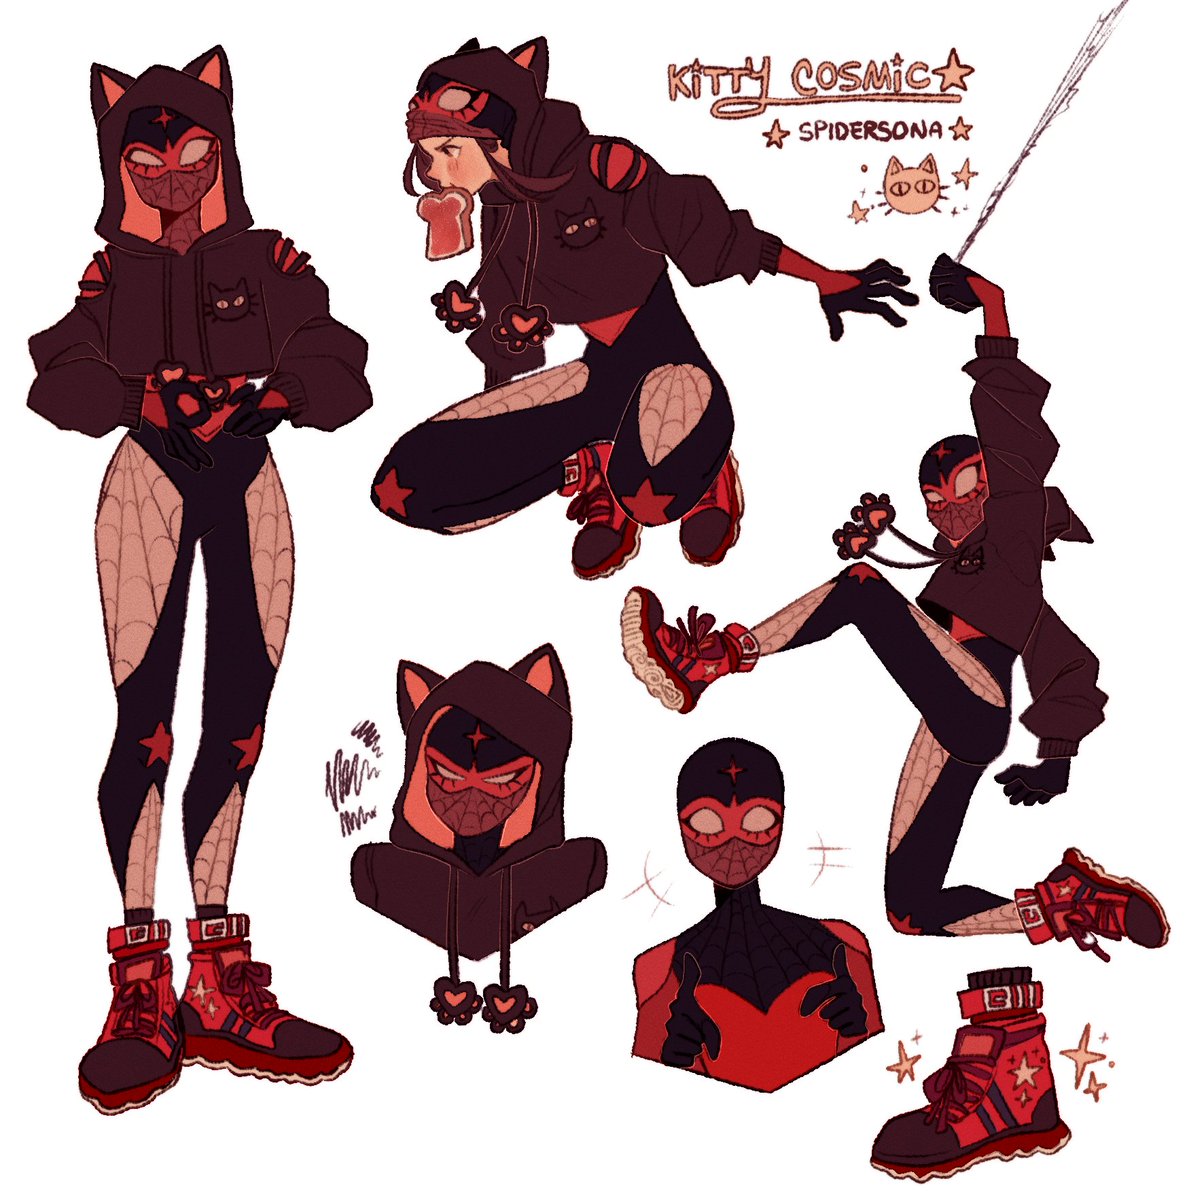 ❀ jay on X: super late to the spidersona trend but i thot id